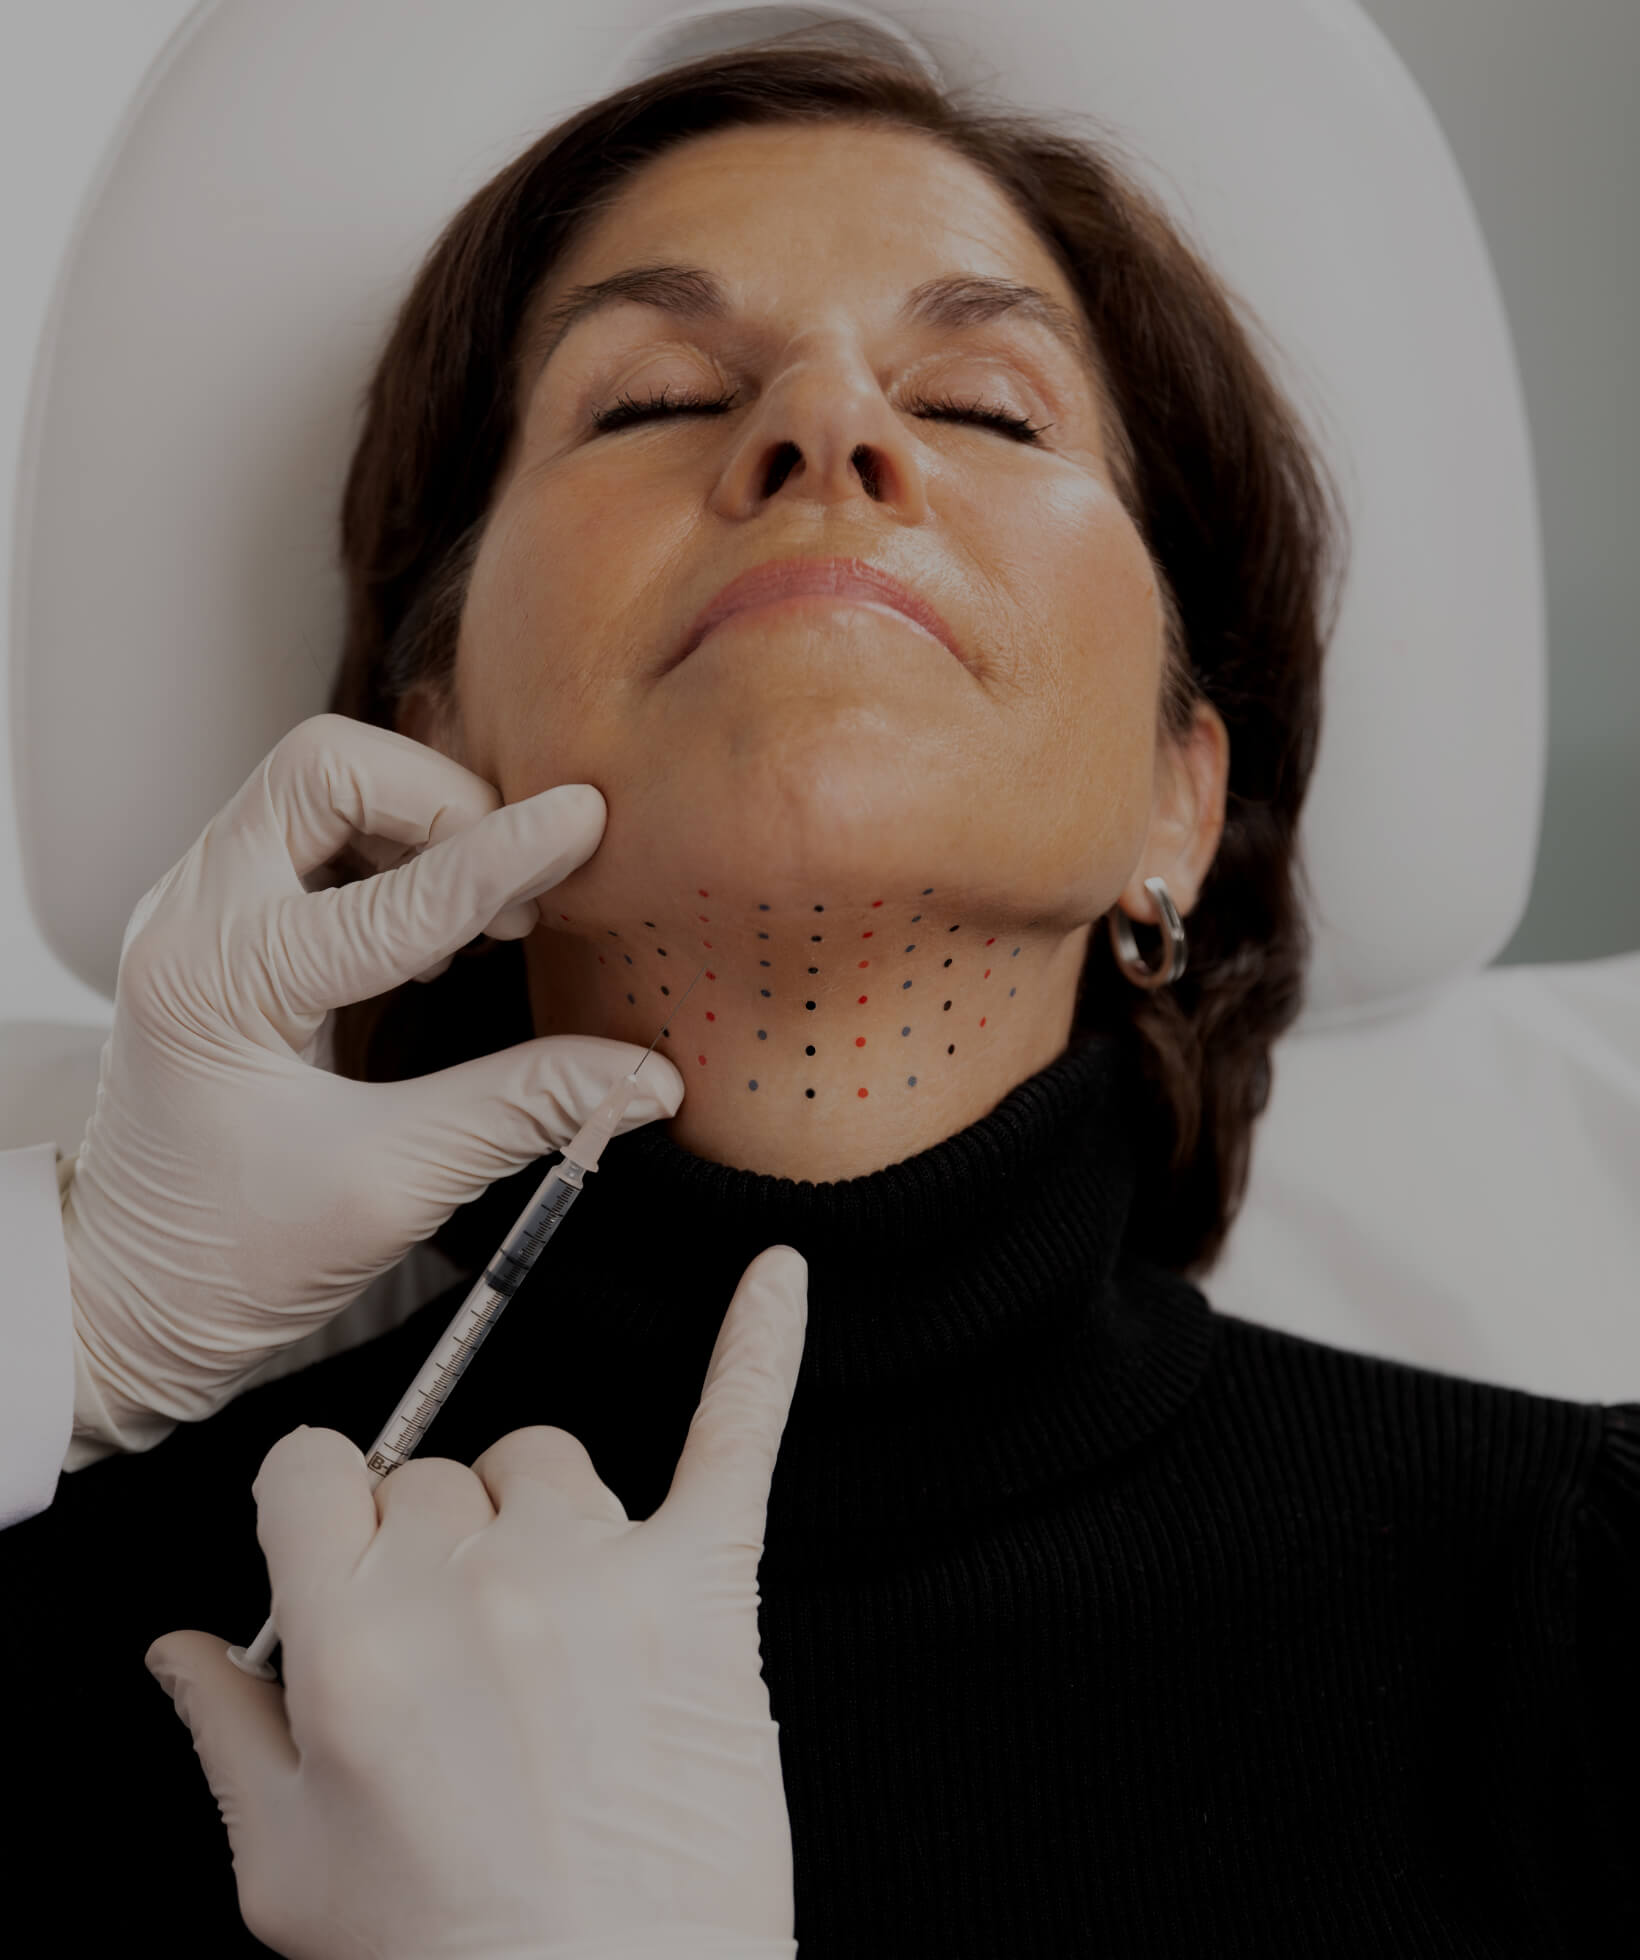 A doctor at Clinique Chloé doing Belkyra injections into a female patient's double chin